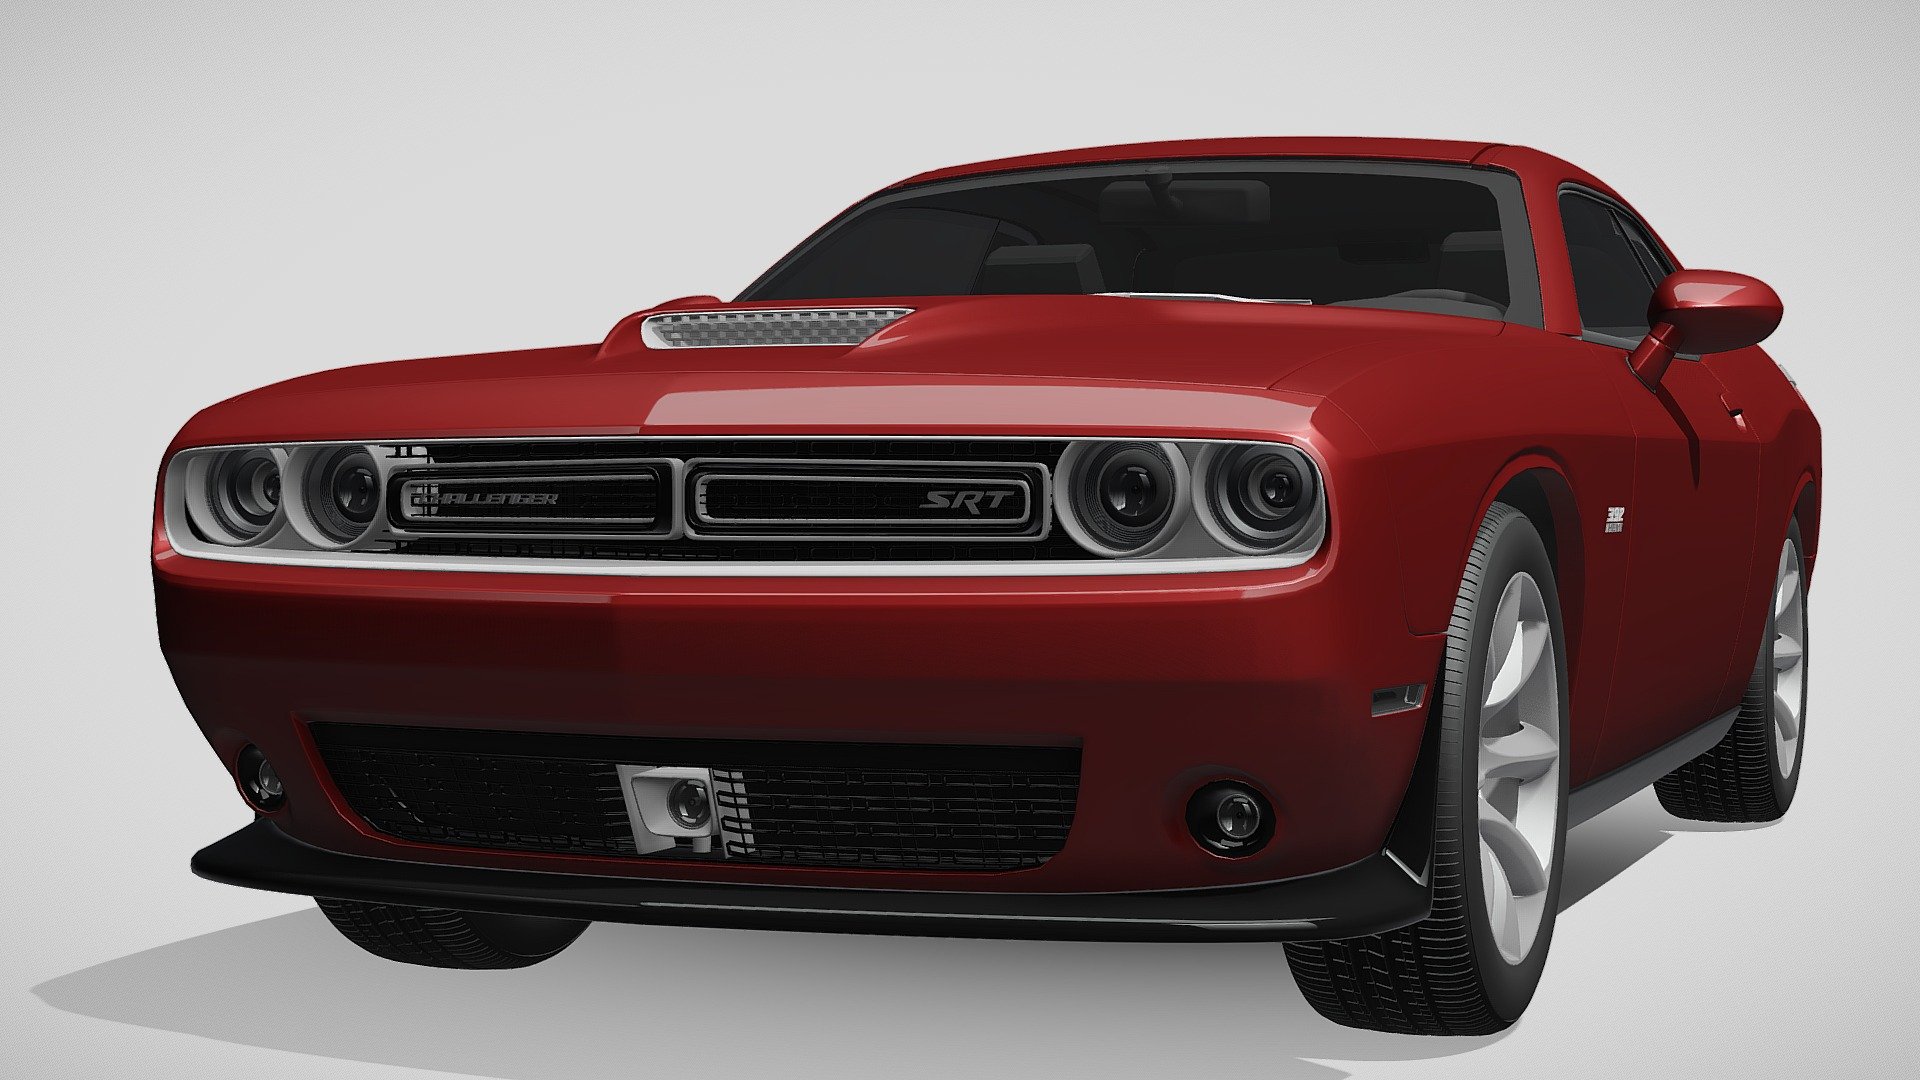 CODE TO THE DODGE CHALLENGER HISTORY CARS - Roblox